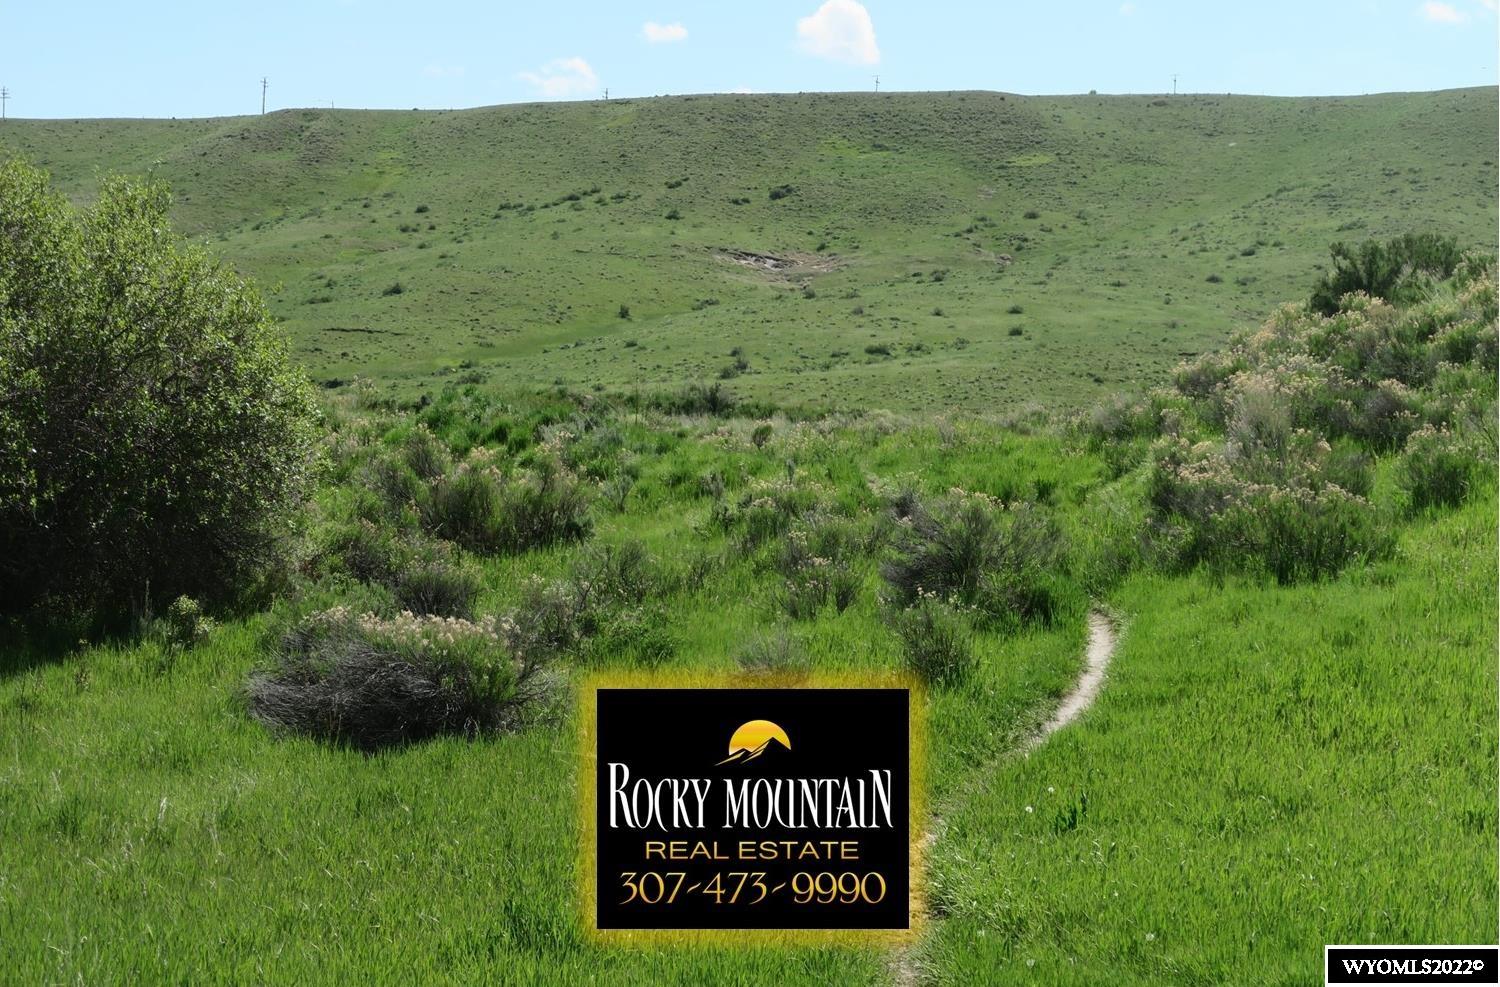 62+/- of Platted Residential Subdivision. Approved by city of Casper. Adjacent to Casper College and Mike Sedar Park. Lots of vegetation, multiple nice homesites with greenery and Casper Mountain view. Call Gary Lever for more information 307-247-1032.